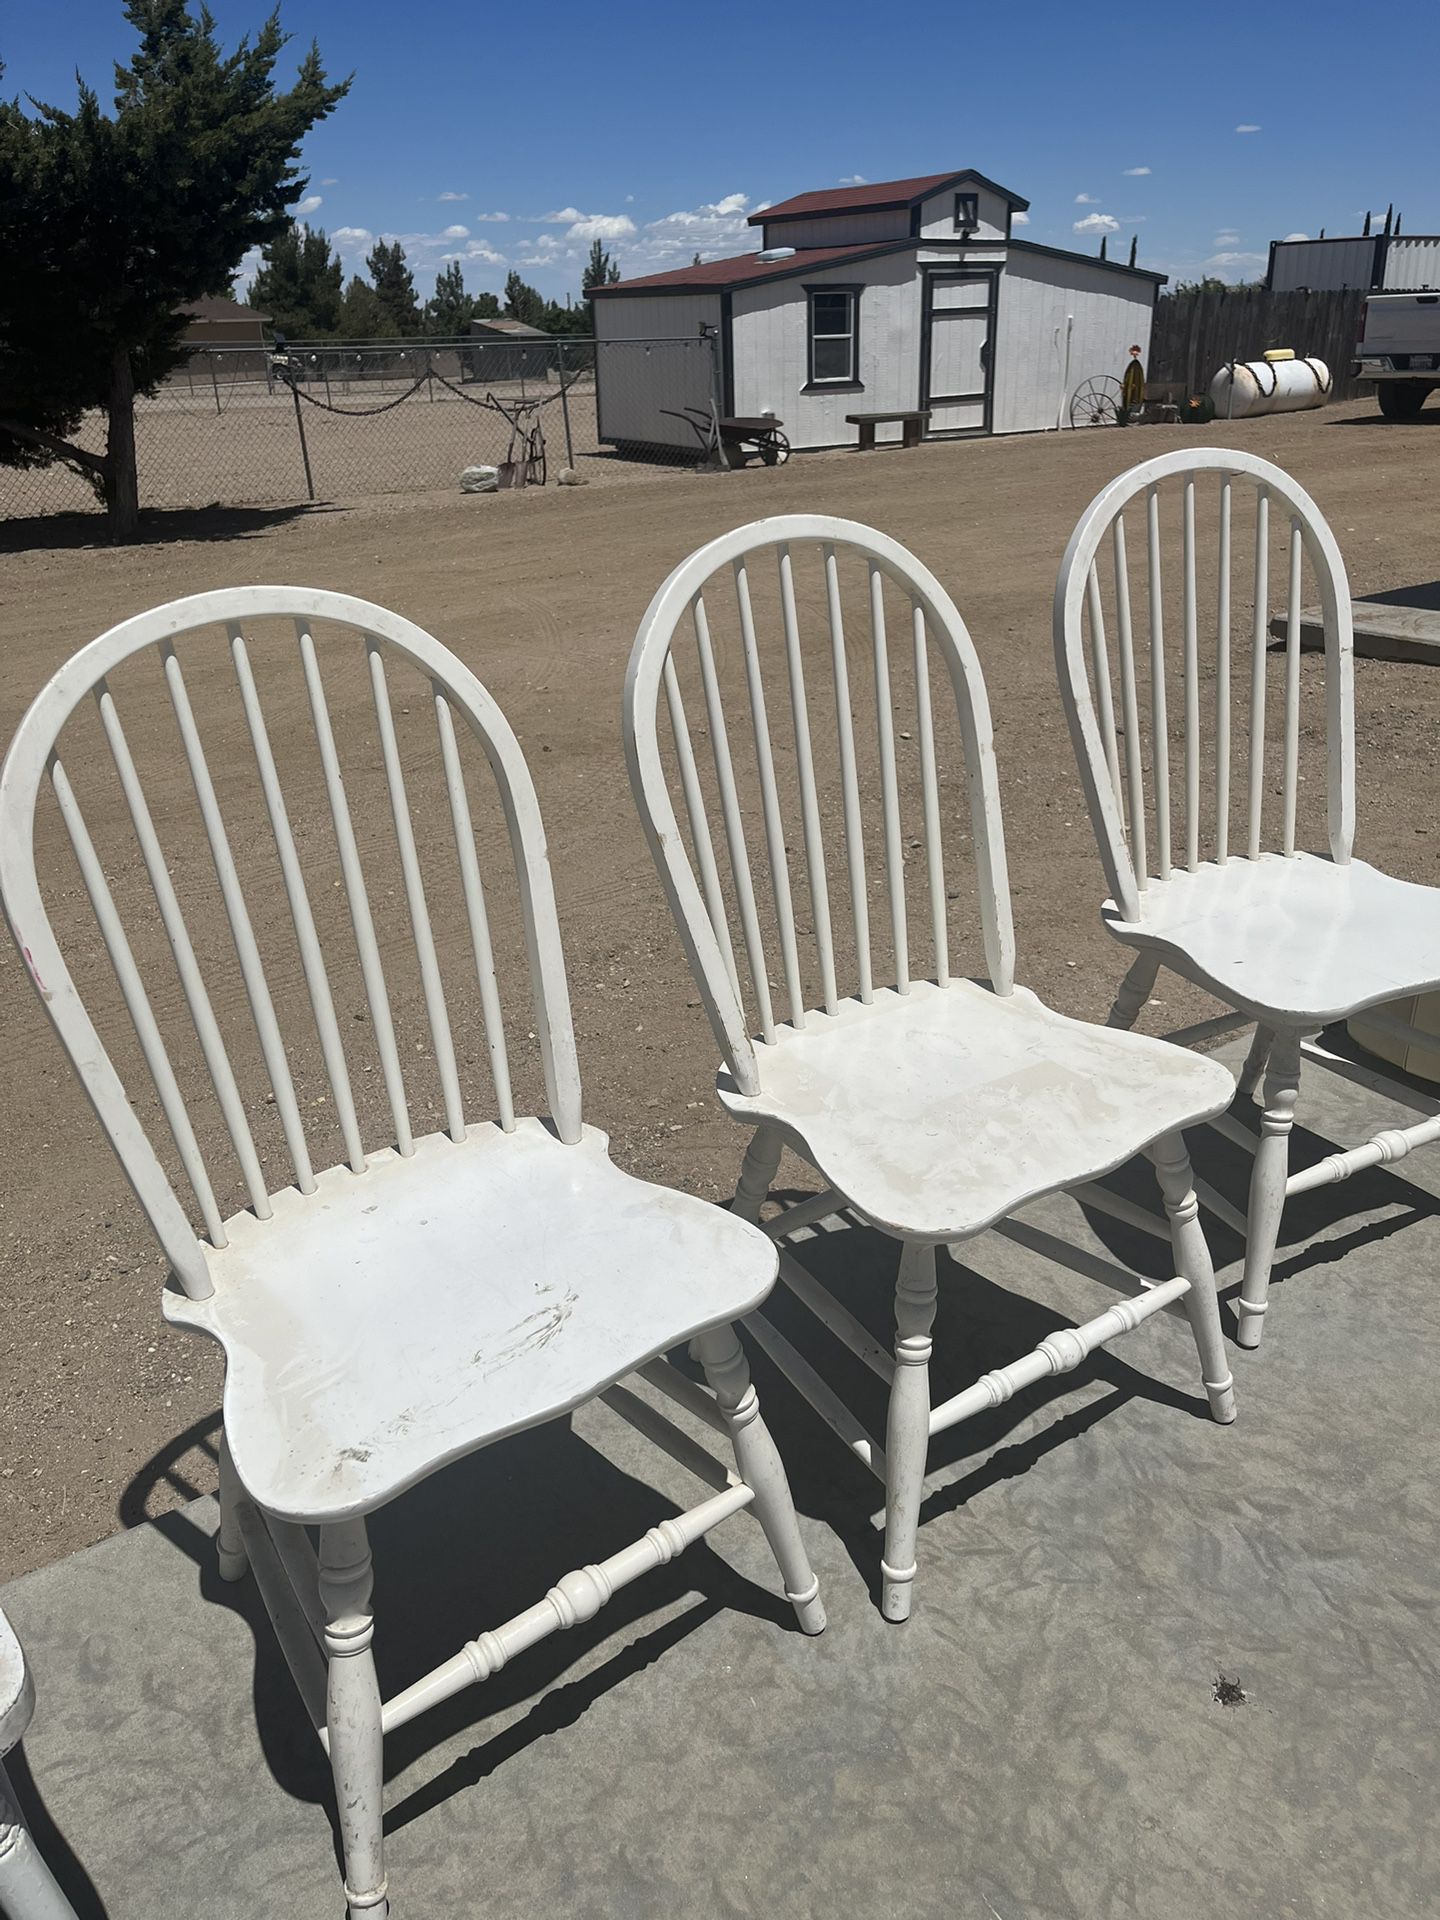 White Farmhouse Wooden Chairs - Lot of 3 